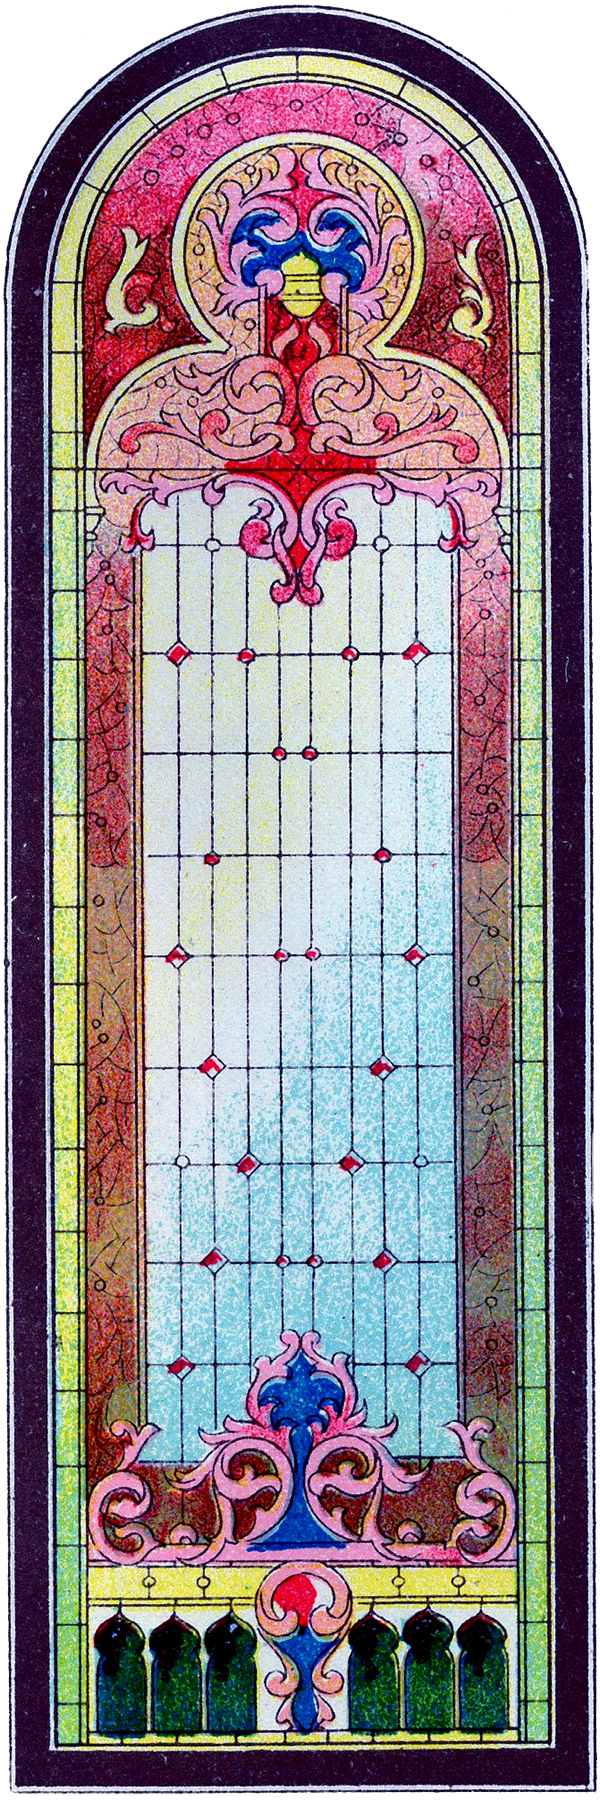 stained glass window clipart - photo #43